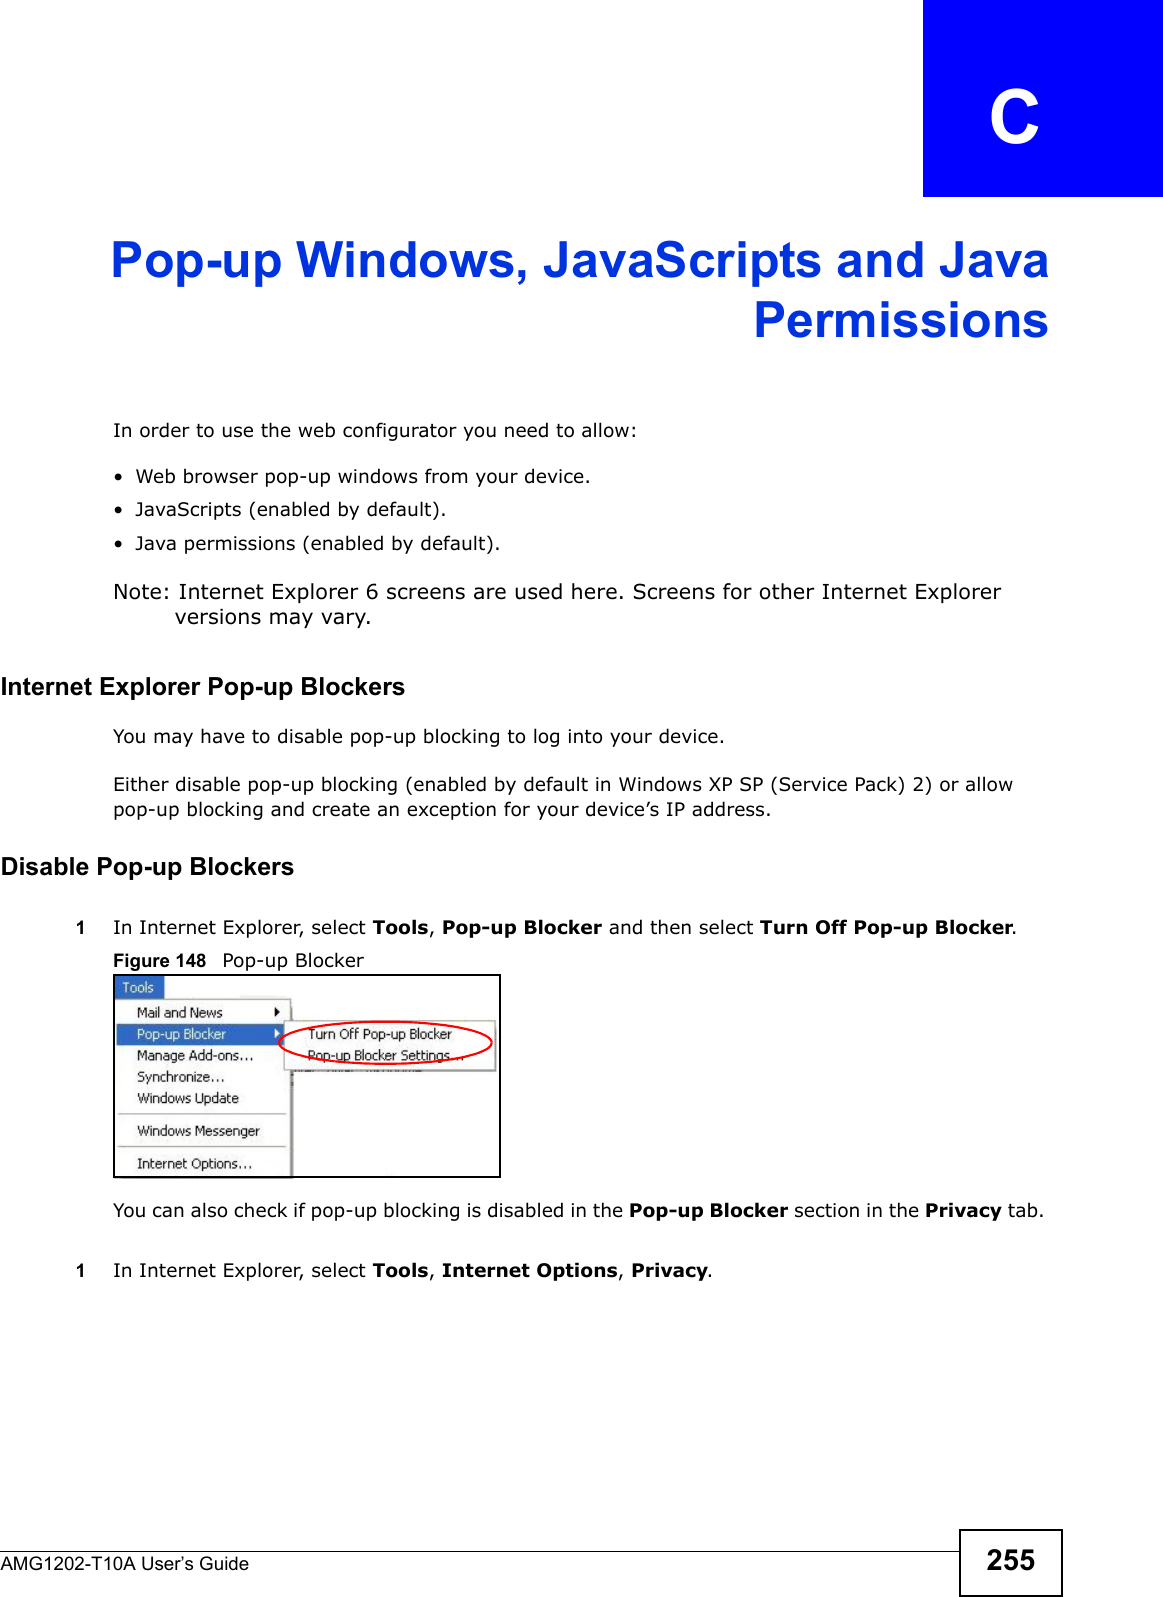 AMG1202-T10A User’s Guide 255APPENDIX   CPop-up Windows, JavaScripts and JavaPermissionsIn order to use the web configurator you need to allow:• Web browser pop-up windows from your device.• JavaScripts (enabled by default).• Java permissions (enabled by default).Note: Internet Explorer 6 screens are used here. Screens for other Internet Explorer versions may vary.Internet Explorer Pop-up BlockersYou may have to disable pop-up blocking to log into your device. Either disable pop-up blocking (enabled by default in Windows XP SP (Service Pack) 2) or allow pop-up blocking and create an exception for your device’s IP address.Disable Pop-up Blockers1In Internet Explorer, select Tools, Pop-up Blocker and then select Turn Off Pop-up Blocker. Figure 148   Pop-up BlockerYou can also check if pop-up blocking is disabled in the Pop-up Blocker section in the Privacy tab. 1In Internet Explorer, select Tools, Internet Options, Privacy.